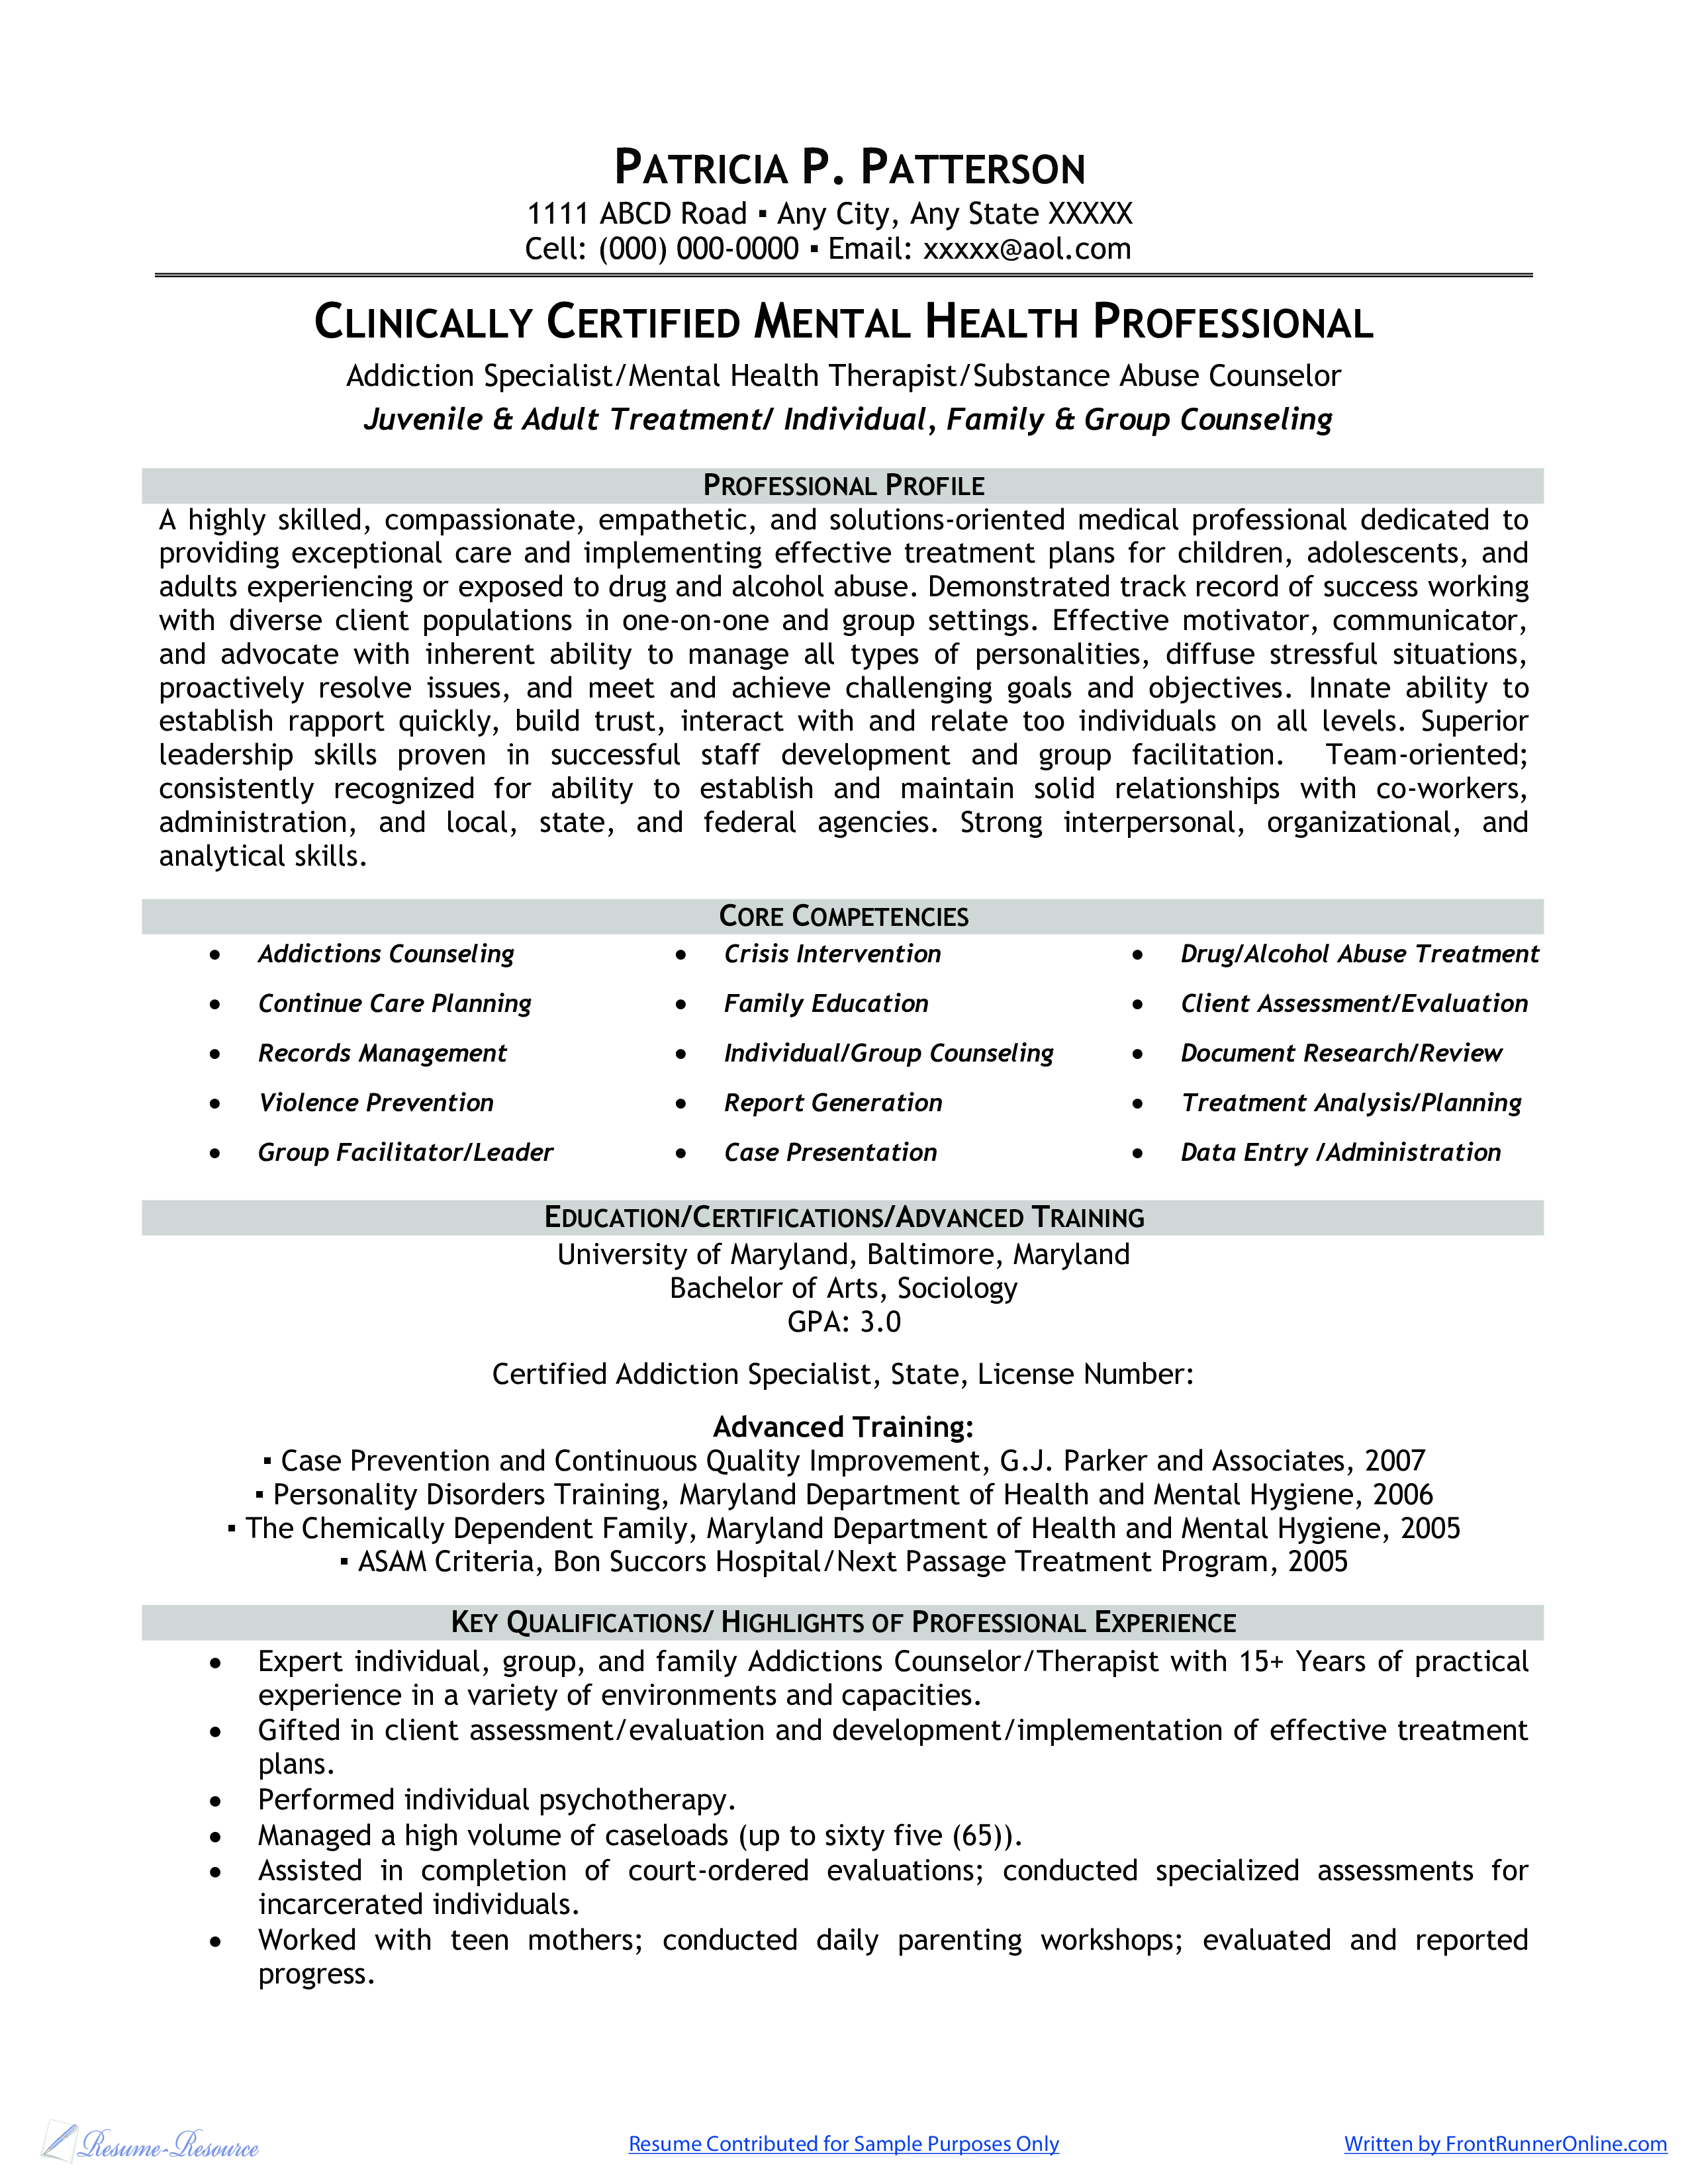 Clinically Certified Mental Health Professional Resume Templates at